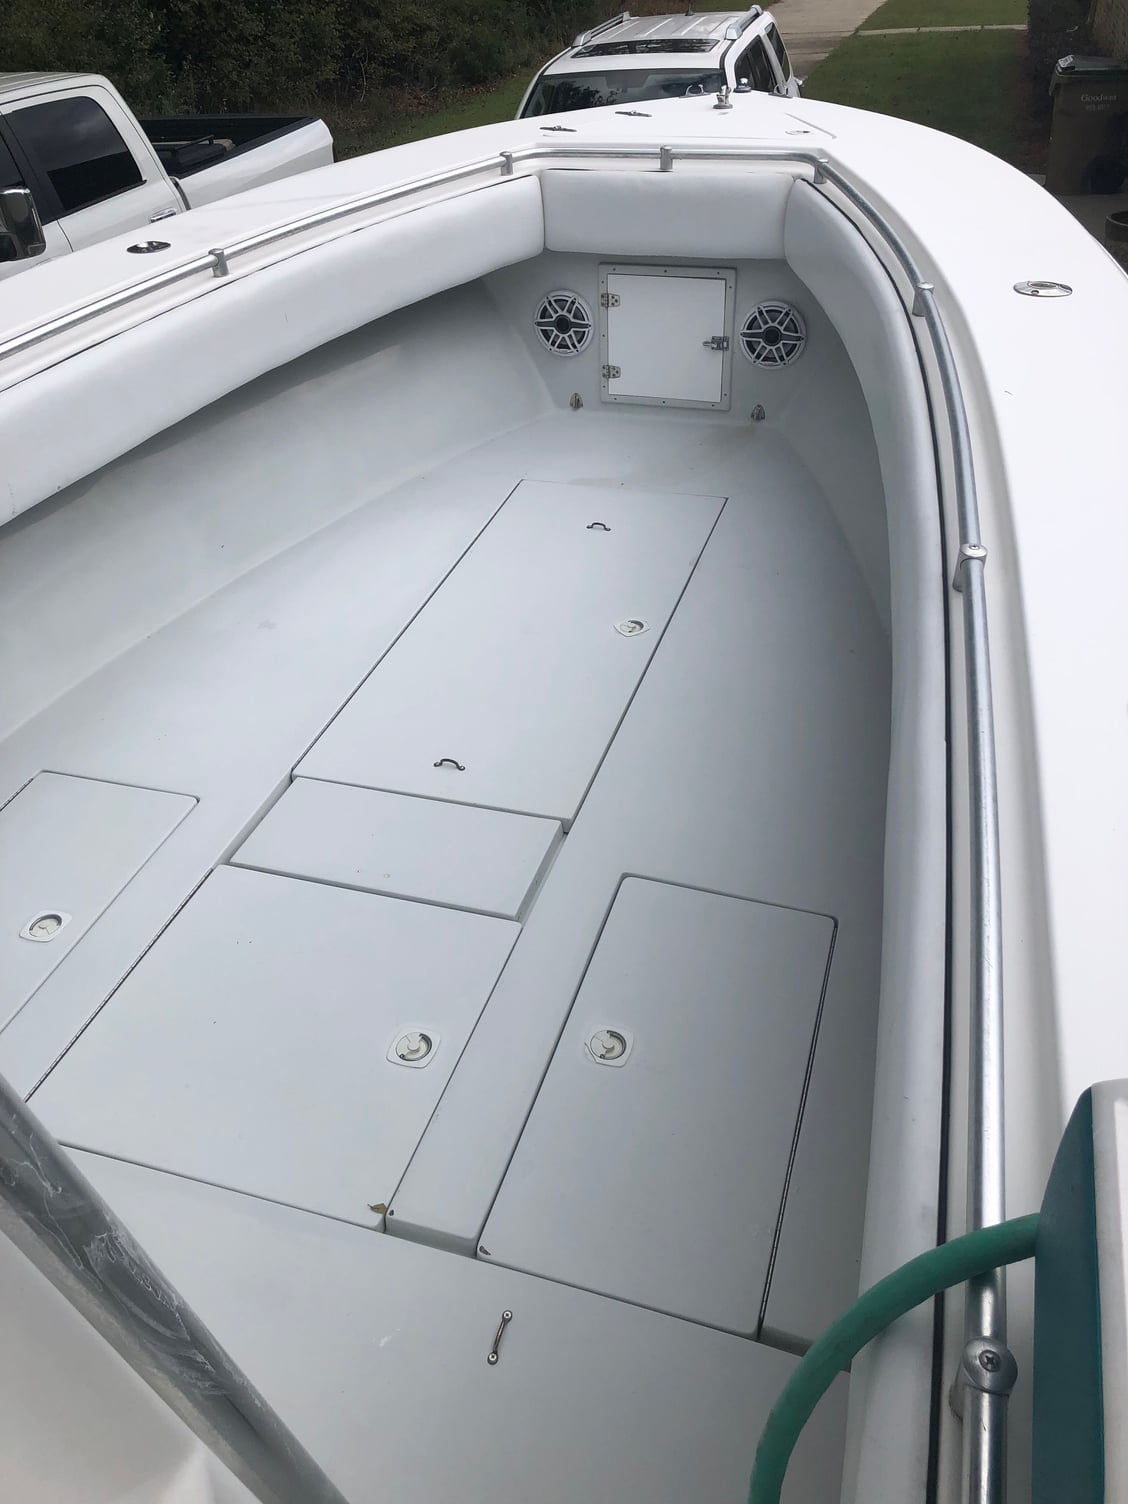 27 Contender transom rod holder - The Hull Truth - Boating and